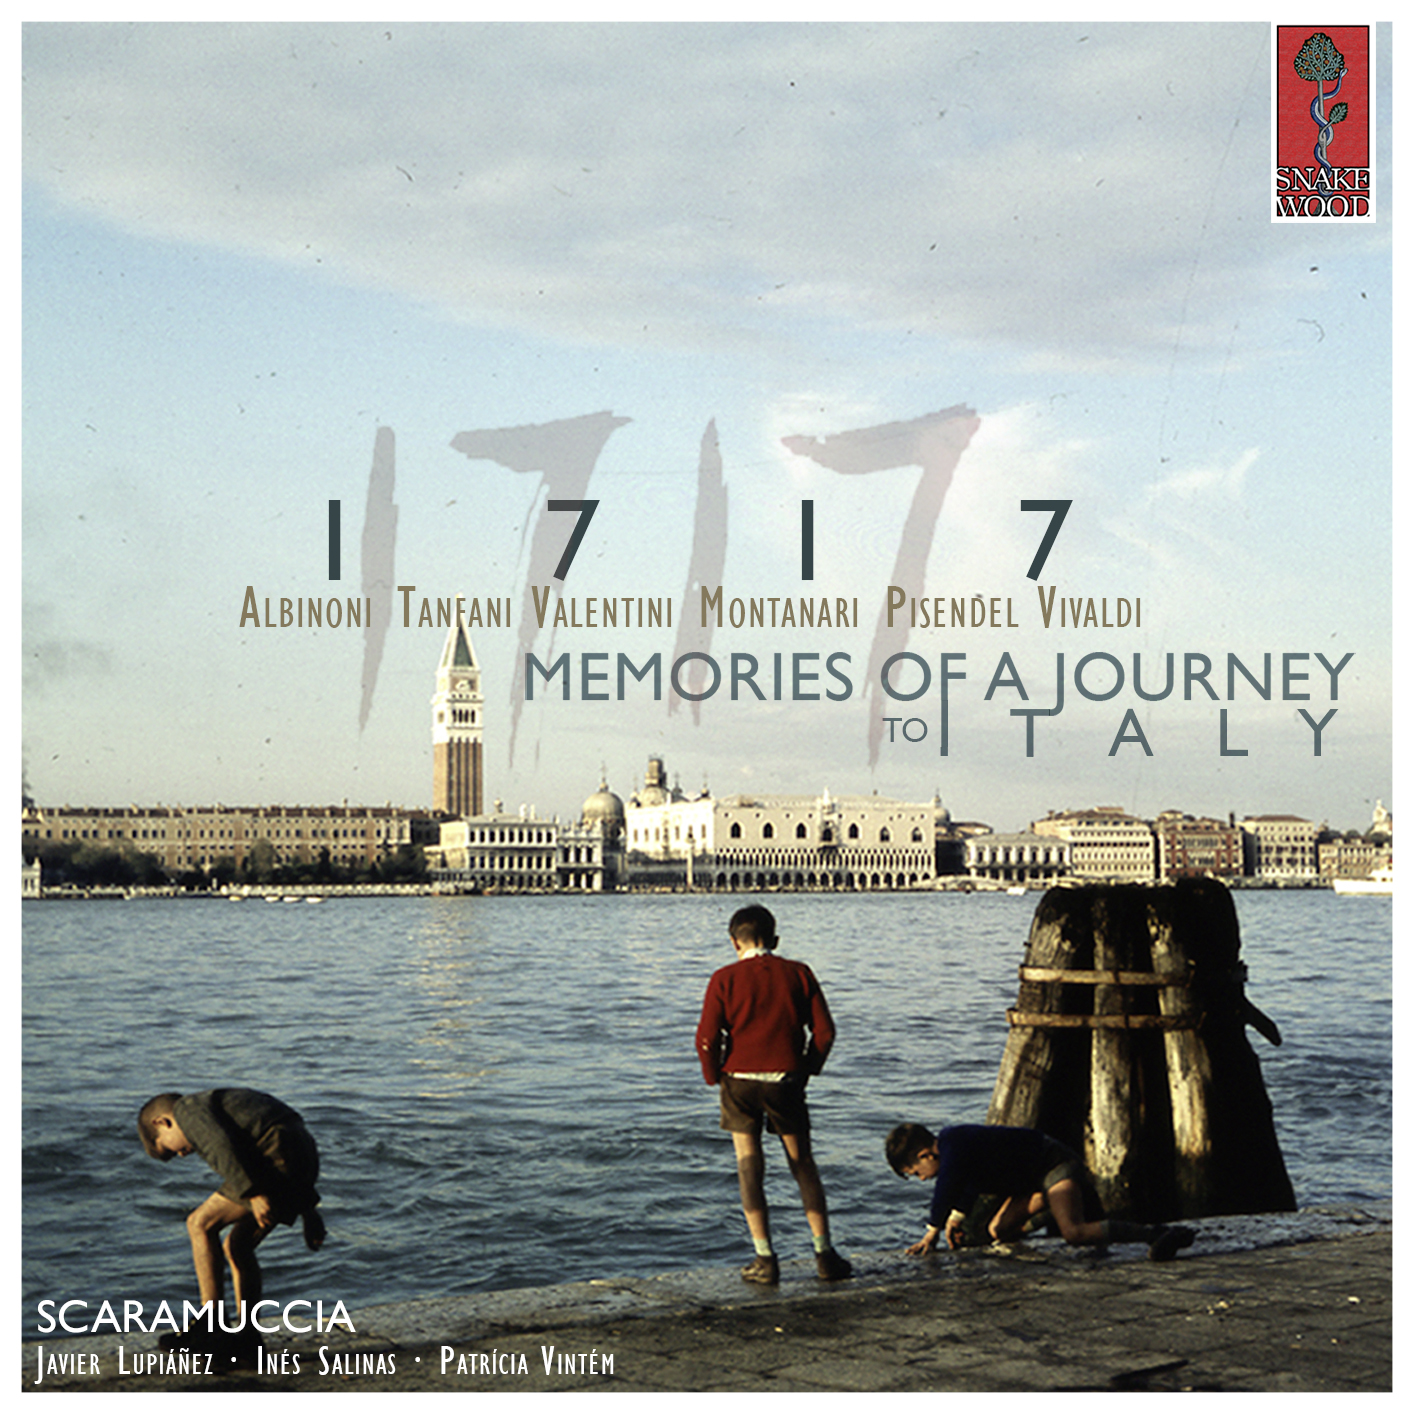 Scaramuccia - 1717: Memories of a Journey to Italy (2018/2021) [FLAC 24bit/96kHz]